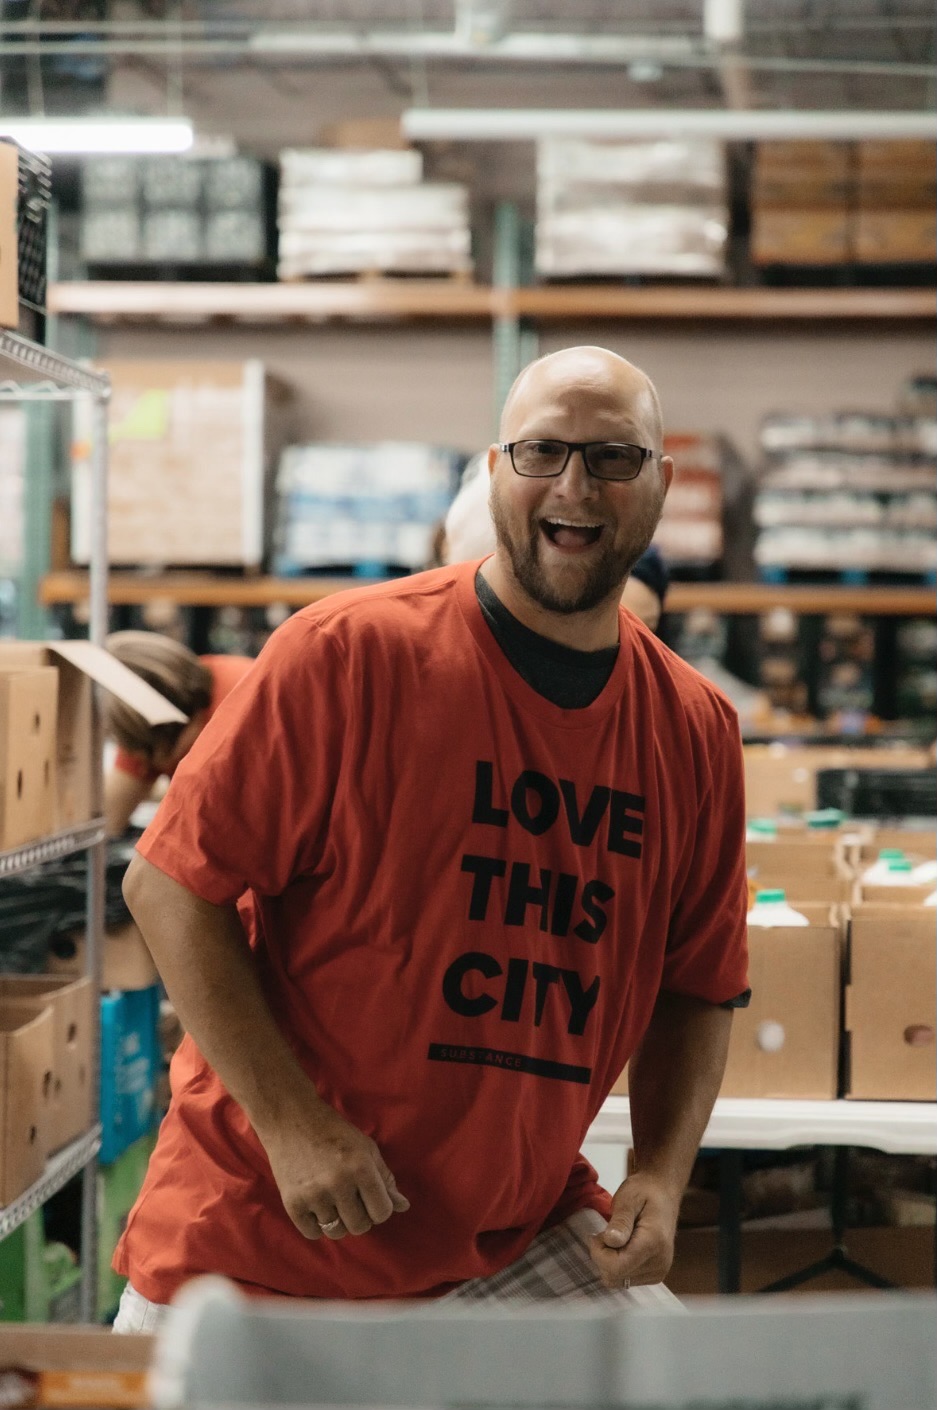 Man in warehouse smiling wearing t-shirt that says "Love This City"